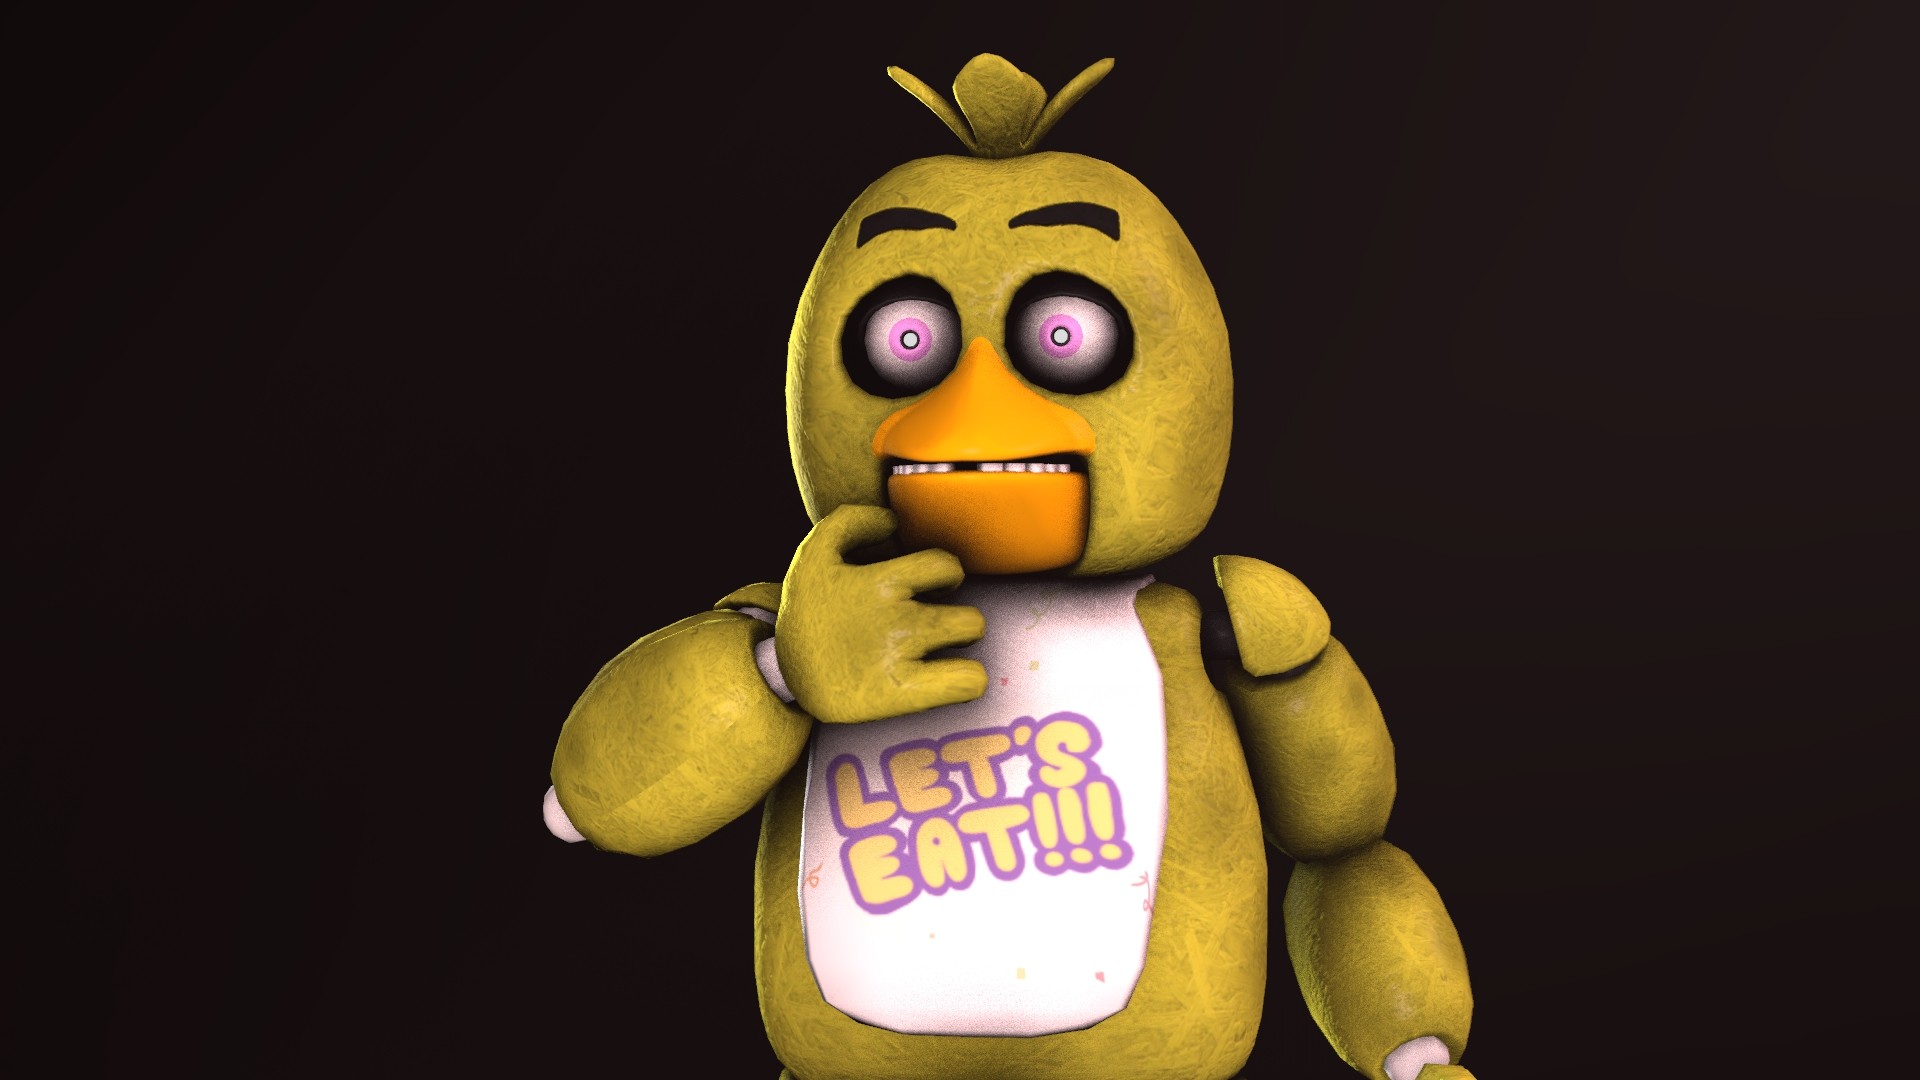 Toy - Five Nights At Freddy's Chica Pokemon , HD Wallpaper & Backgrounds